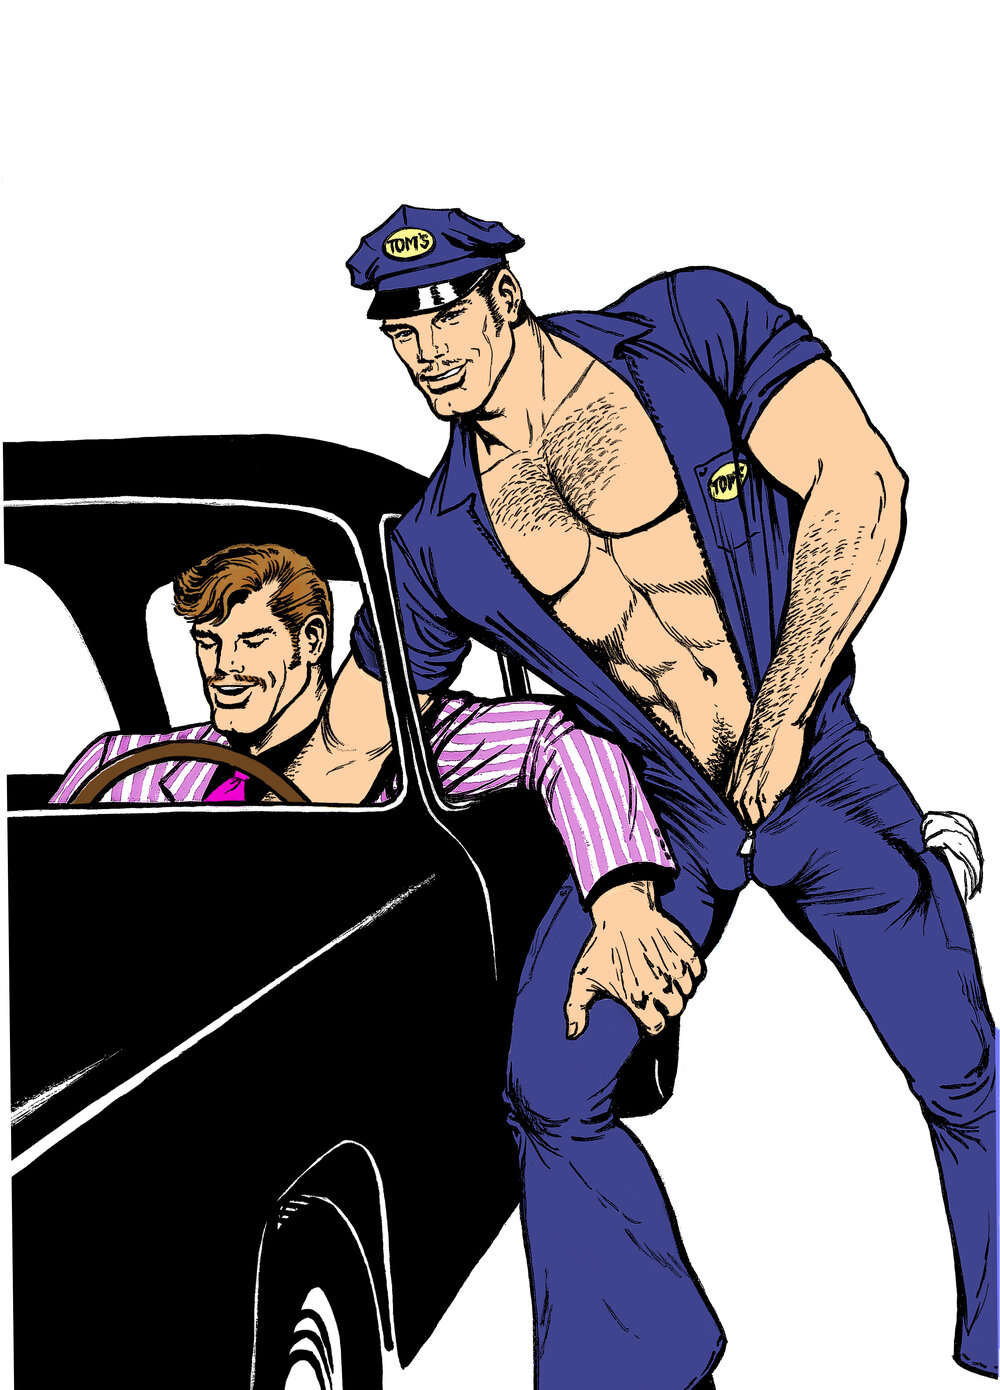 Tom Of Finland Cartoon - Tom of Finland Coloring Book â€” Peachy Kings: Gay T-shirts + Tom of Finland